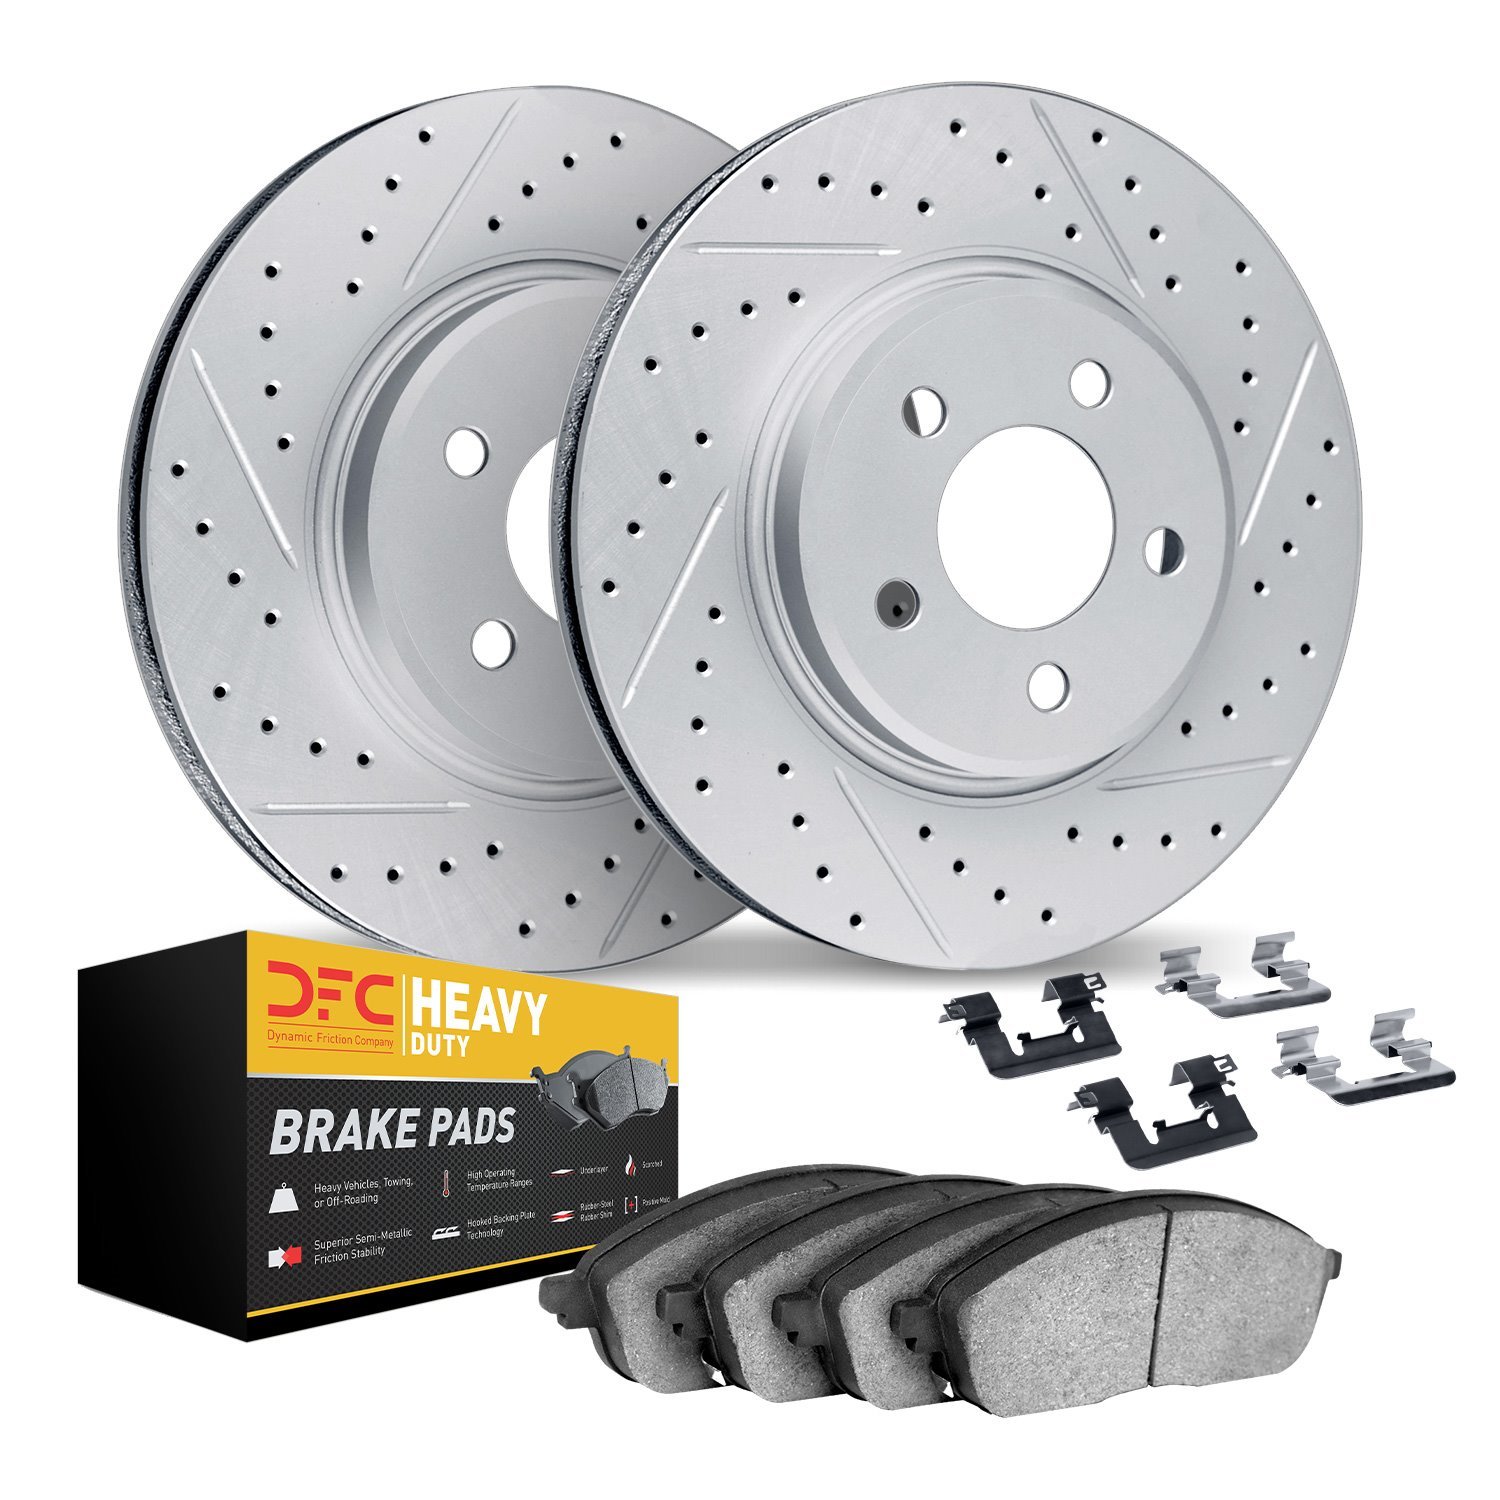 2212-99076 Geoperformance Drilled/Slotted Rotors w/Heavy-Duty Pads Kit & Hardware, 1983-1994 Ford/Lincoln/Mercury/Mazda, Positio